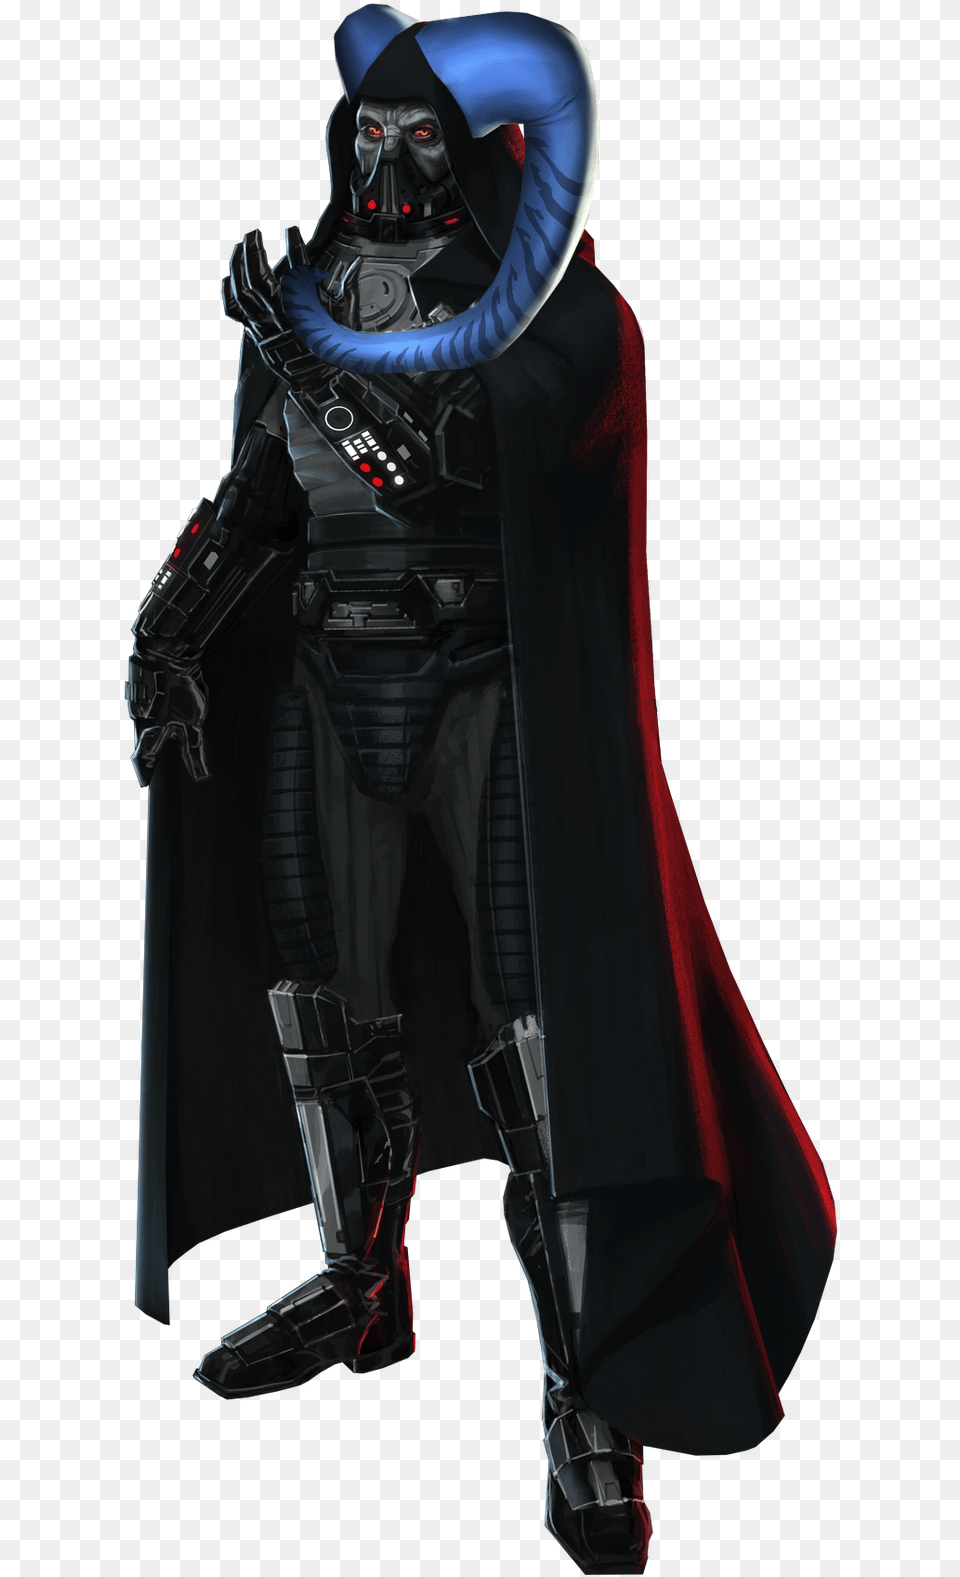 Star Wars Old Republic Sith Suit Darth Malgus, Cape, Clothing, Fashion, Adult Png Image